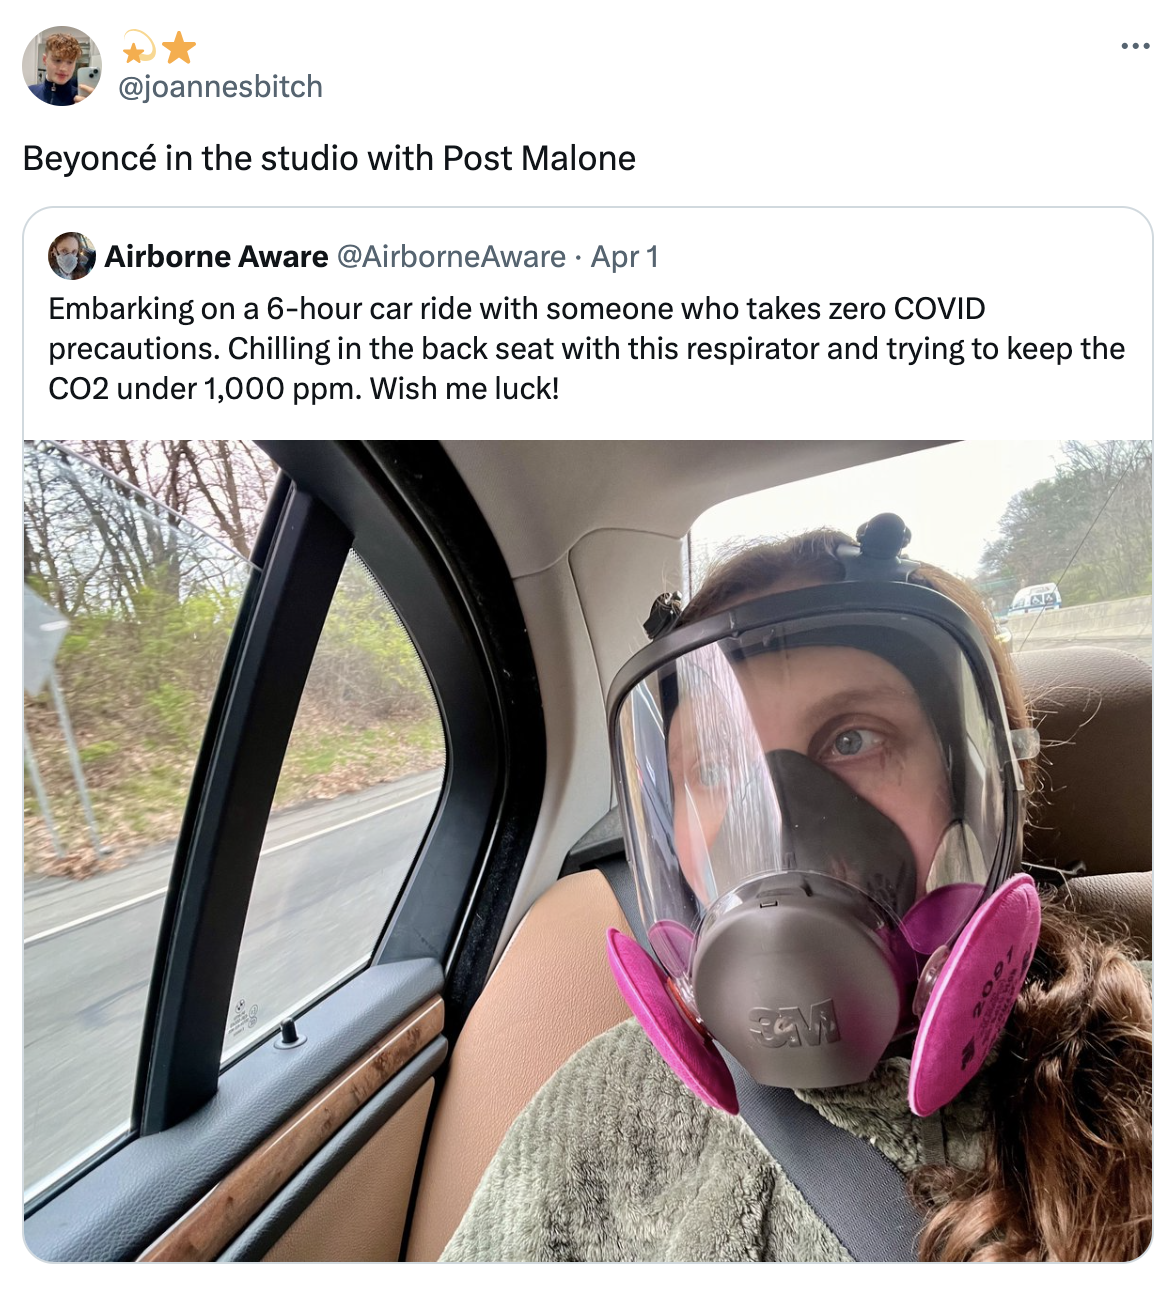 screenshot - Beyonc in the studio with Post Malone Airborne Aware Apr 1 Embarking on a 6hour car ride with someone who takes zero Covid precautions. Chilling in the back seat with this respirator and trying to keep the CO2 under 1,000 ppm. Wish me luck!